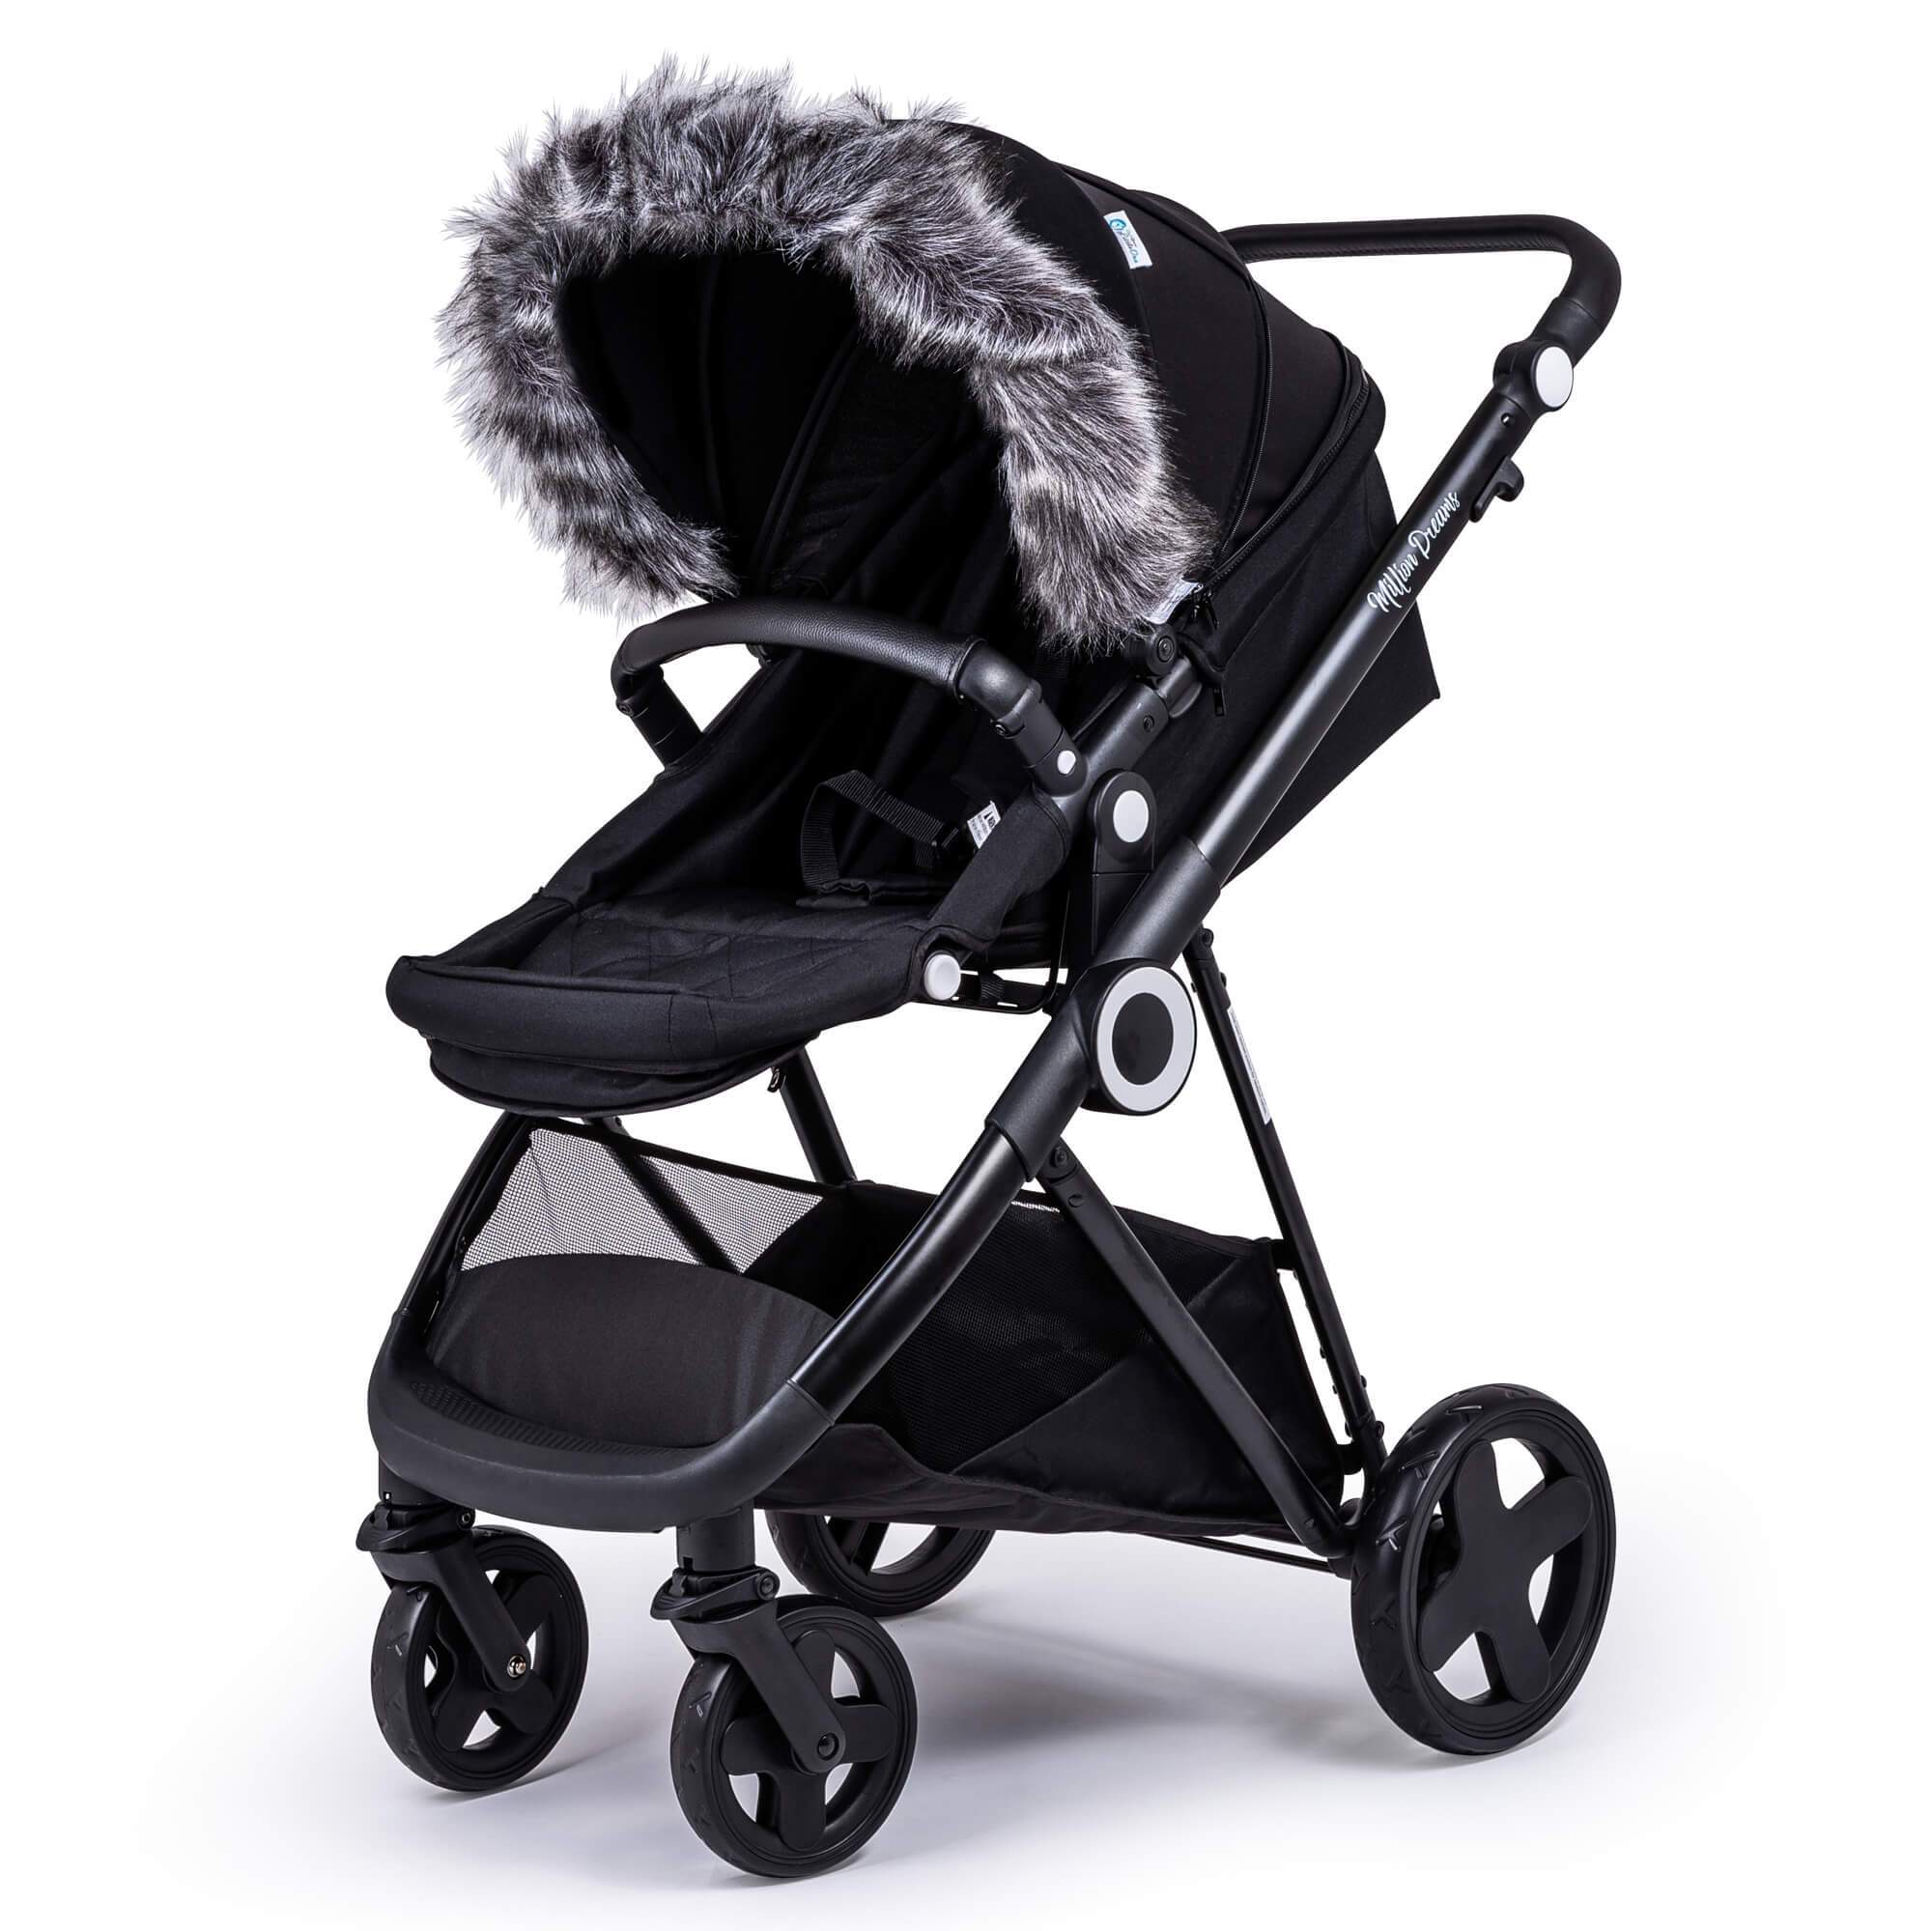 Pram Fur Hood Trim Attachment for Pushchair Compatible with Baby Elegance - Dark Grey / Fits All Models | For Your Little One